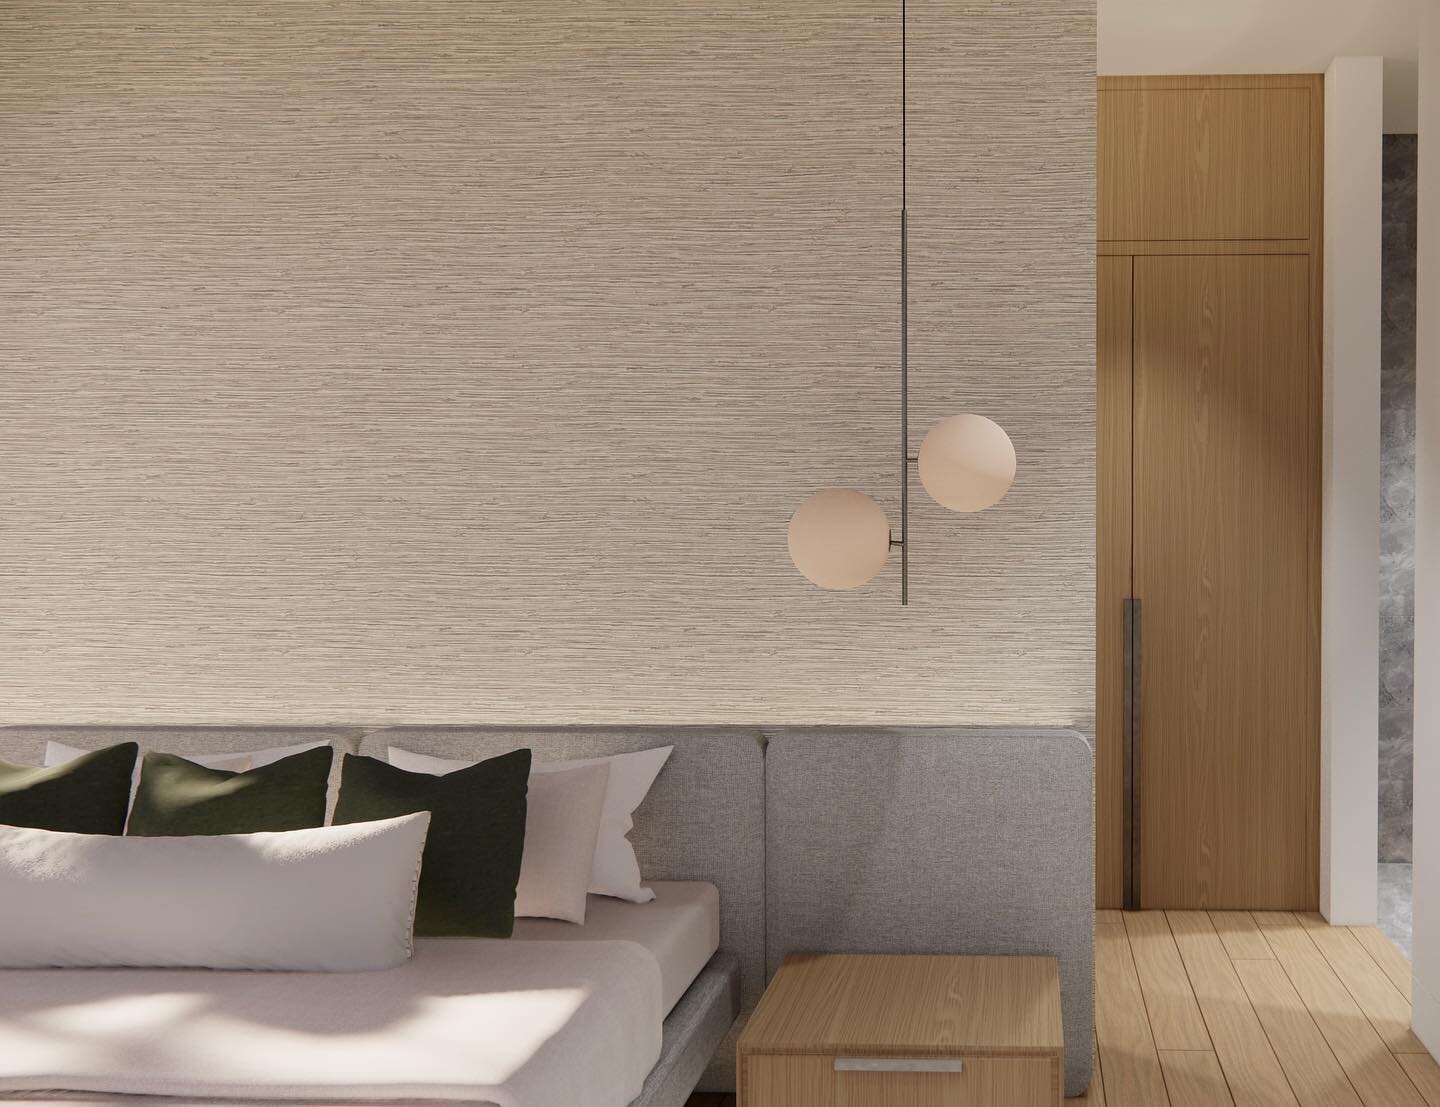 Lots on the go here at the studio!
We're in the midst of some exciting projects and can't wait to share the details. 

In the meantime, here&rsquo;s a little preview. We created this rendering for a new-build project to showcase the primary bedroom's